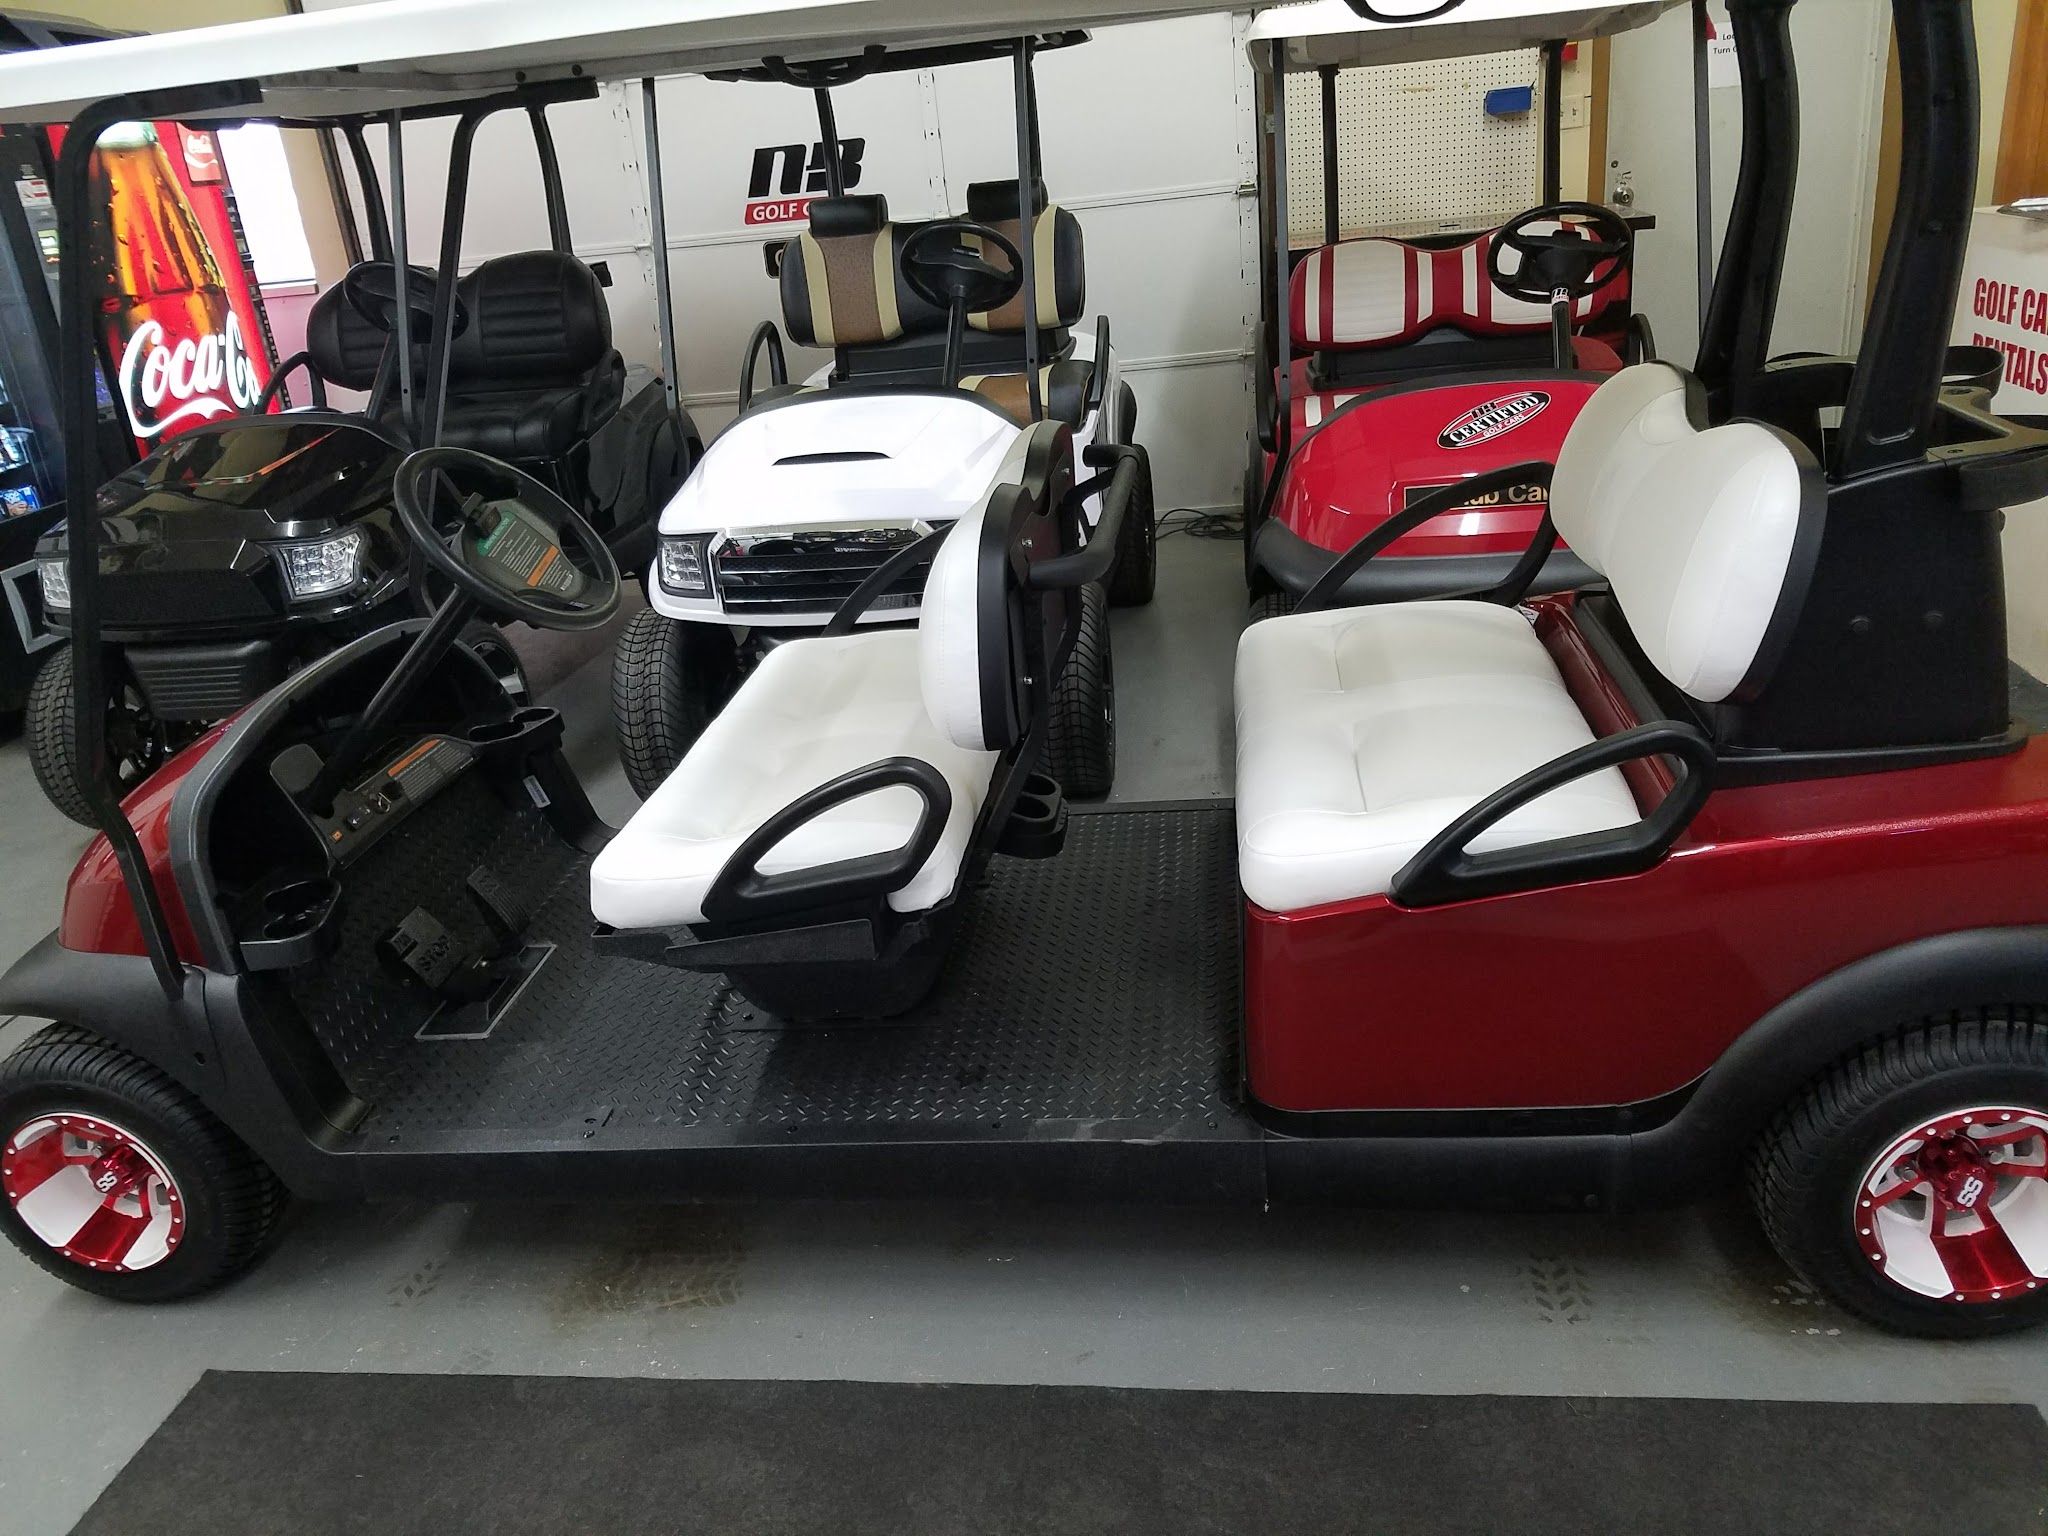 Services & Products NB Golf Cars Sioux Falls in Sioux Falls SD